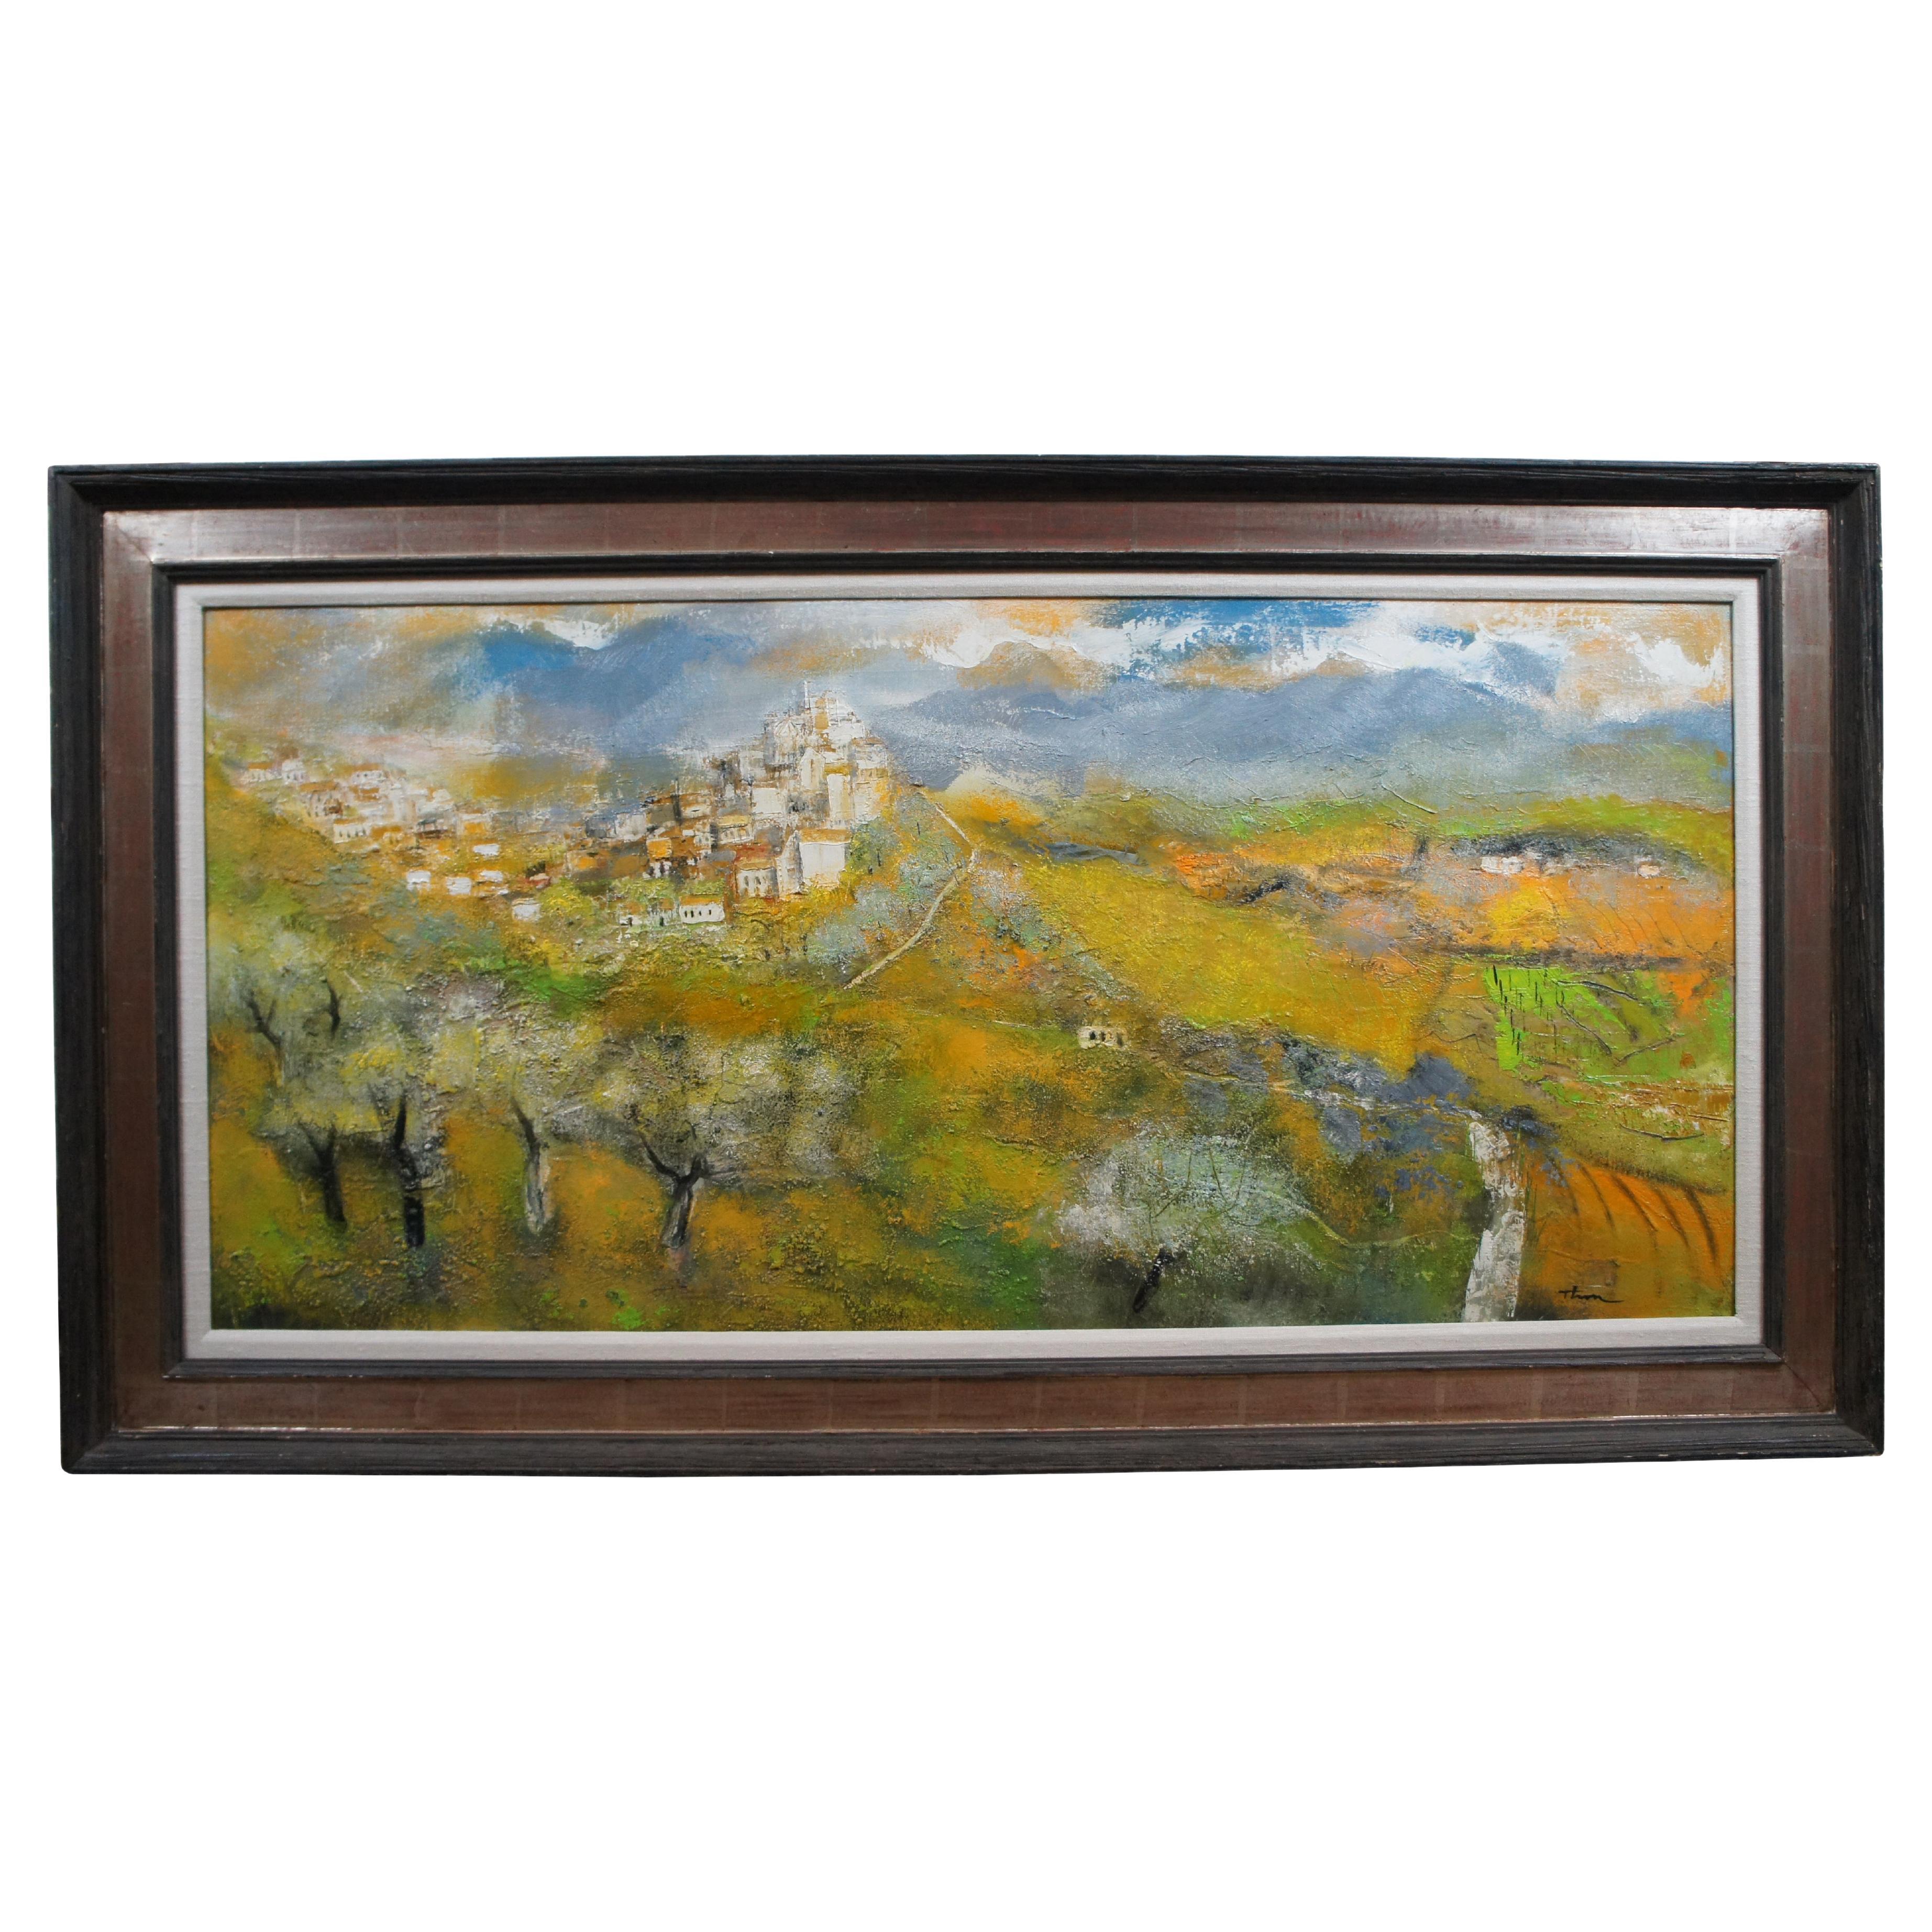 William Thon Mountain Town Calabria Italy Expressionist Oil Landscape Painting For Sale